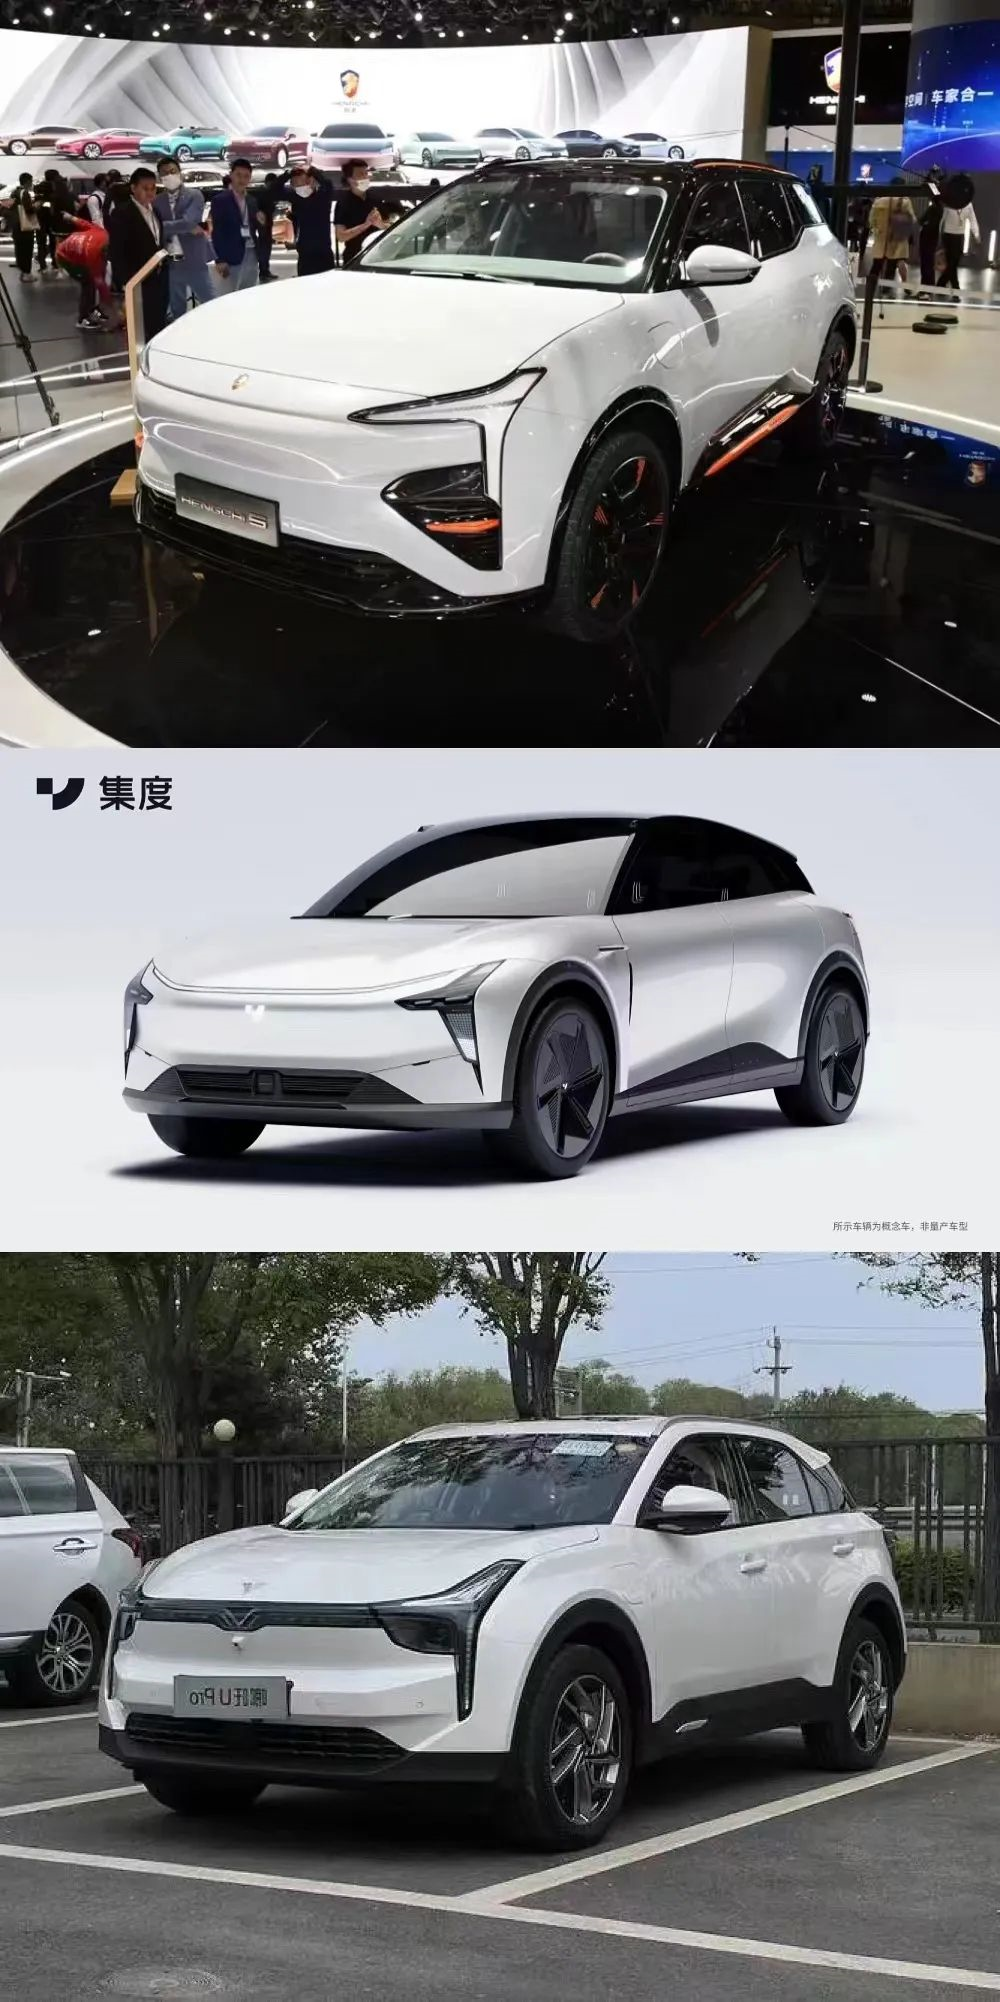 Cars with Similar Styling to ROBO-01